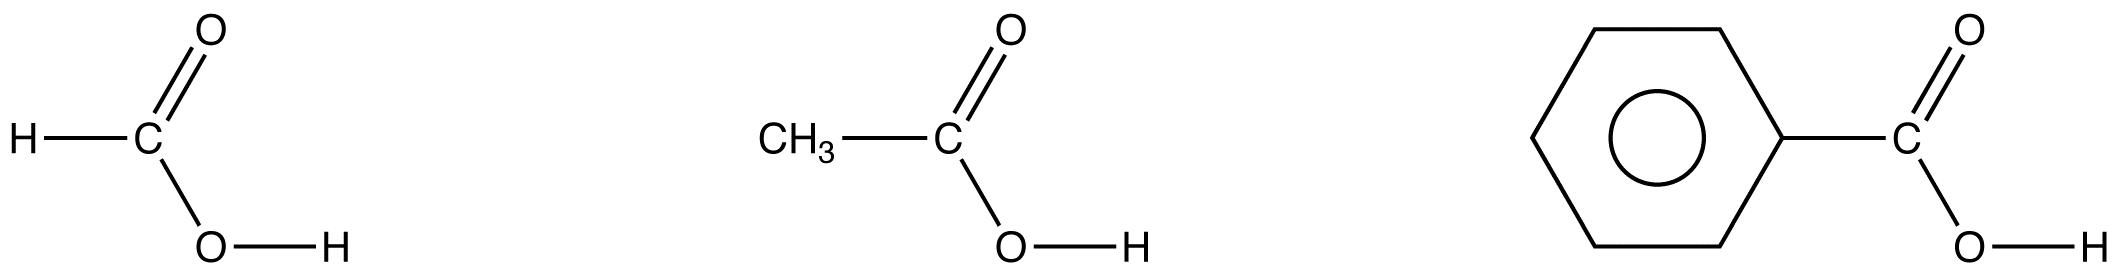 carboxylicacid2.png